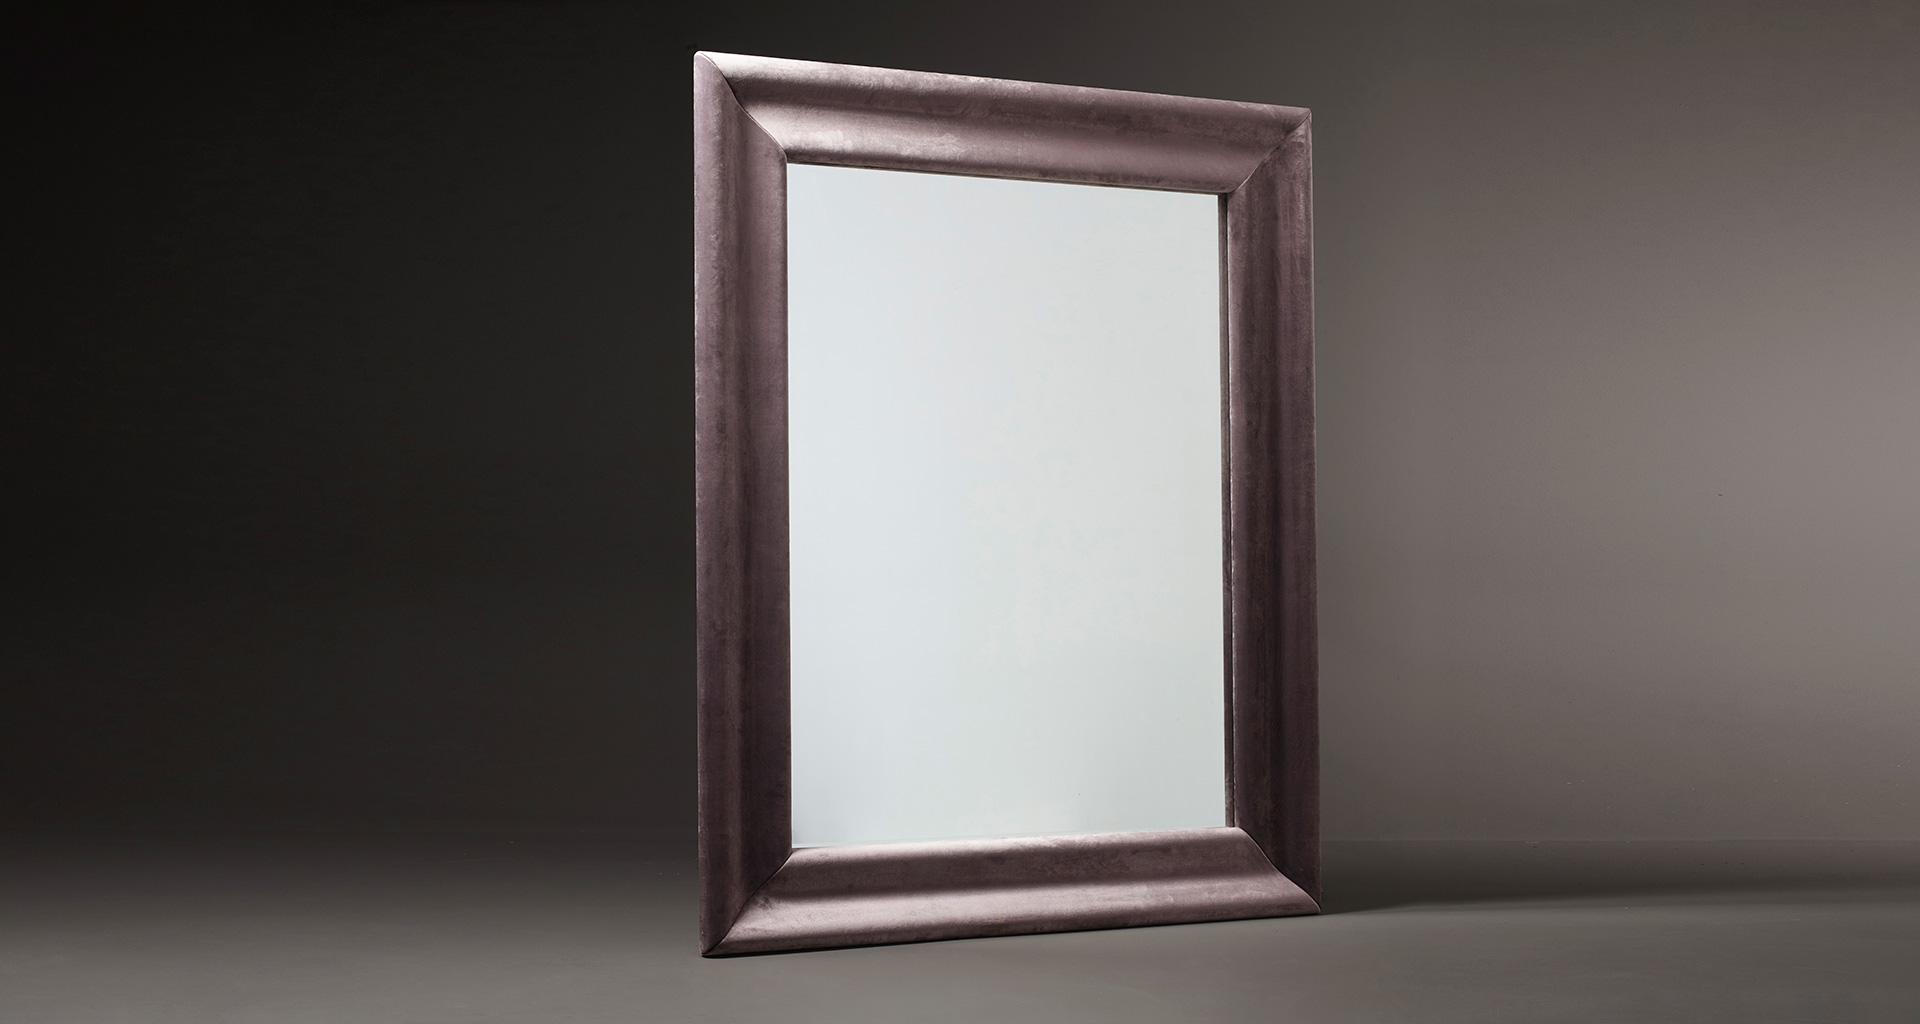 Michele is a large mirror with a wooden frame from the Promemoria's catalogue | Promemoria